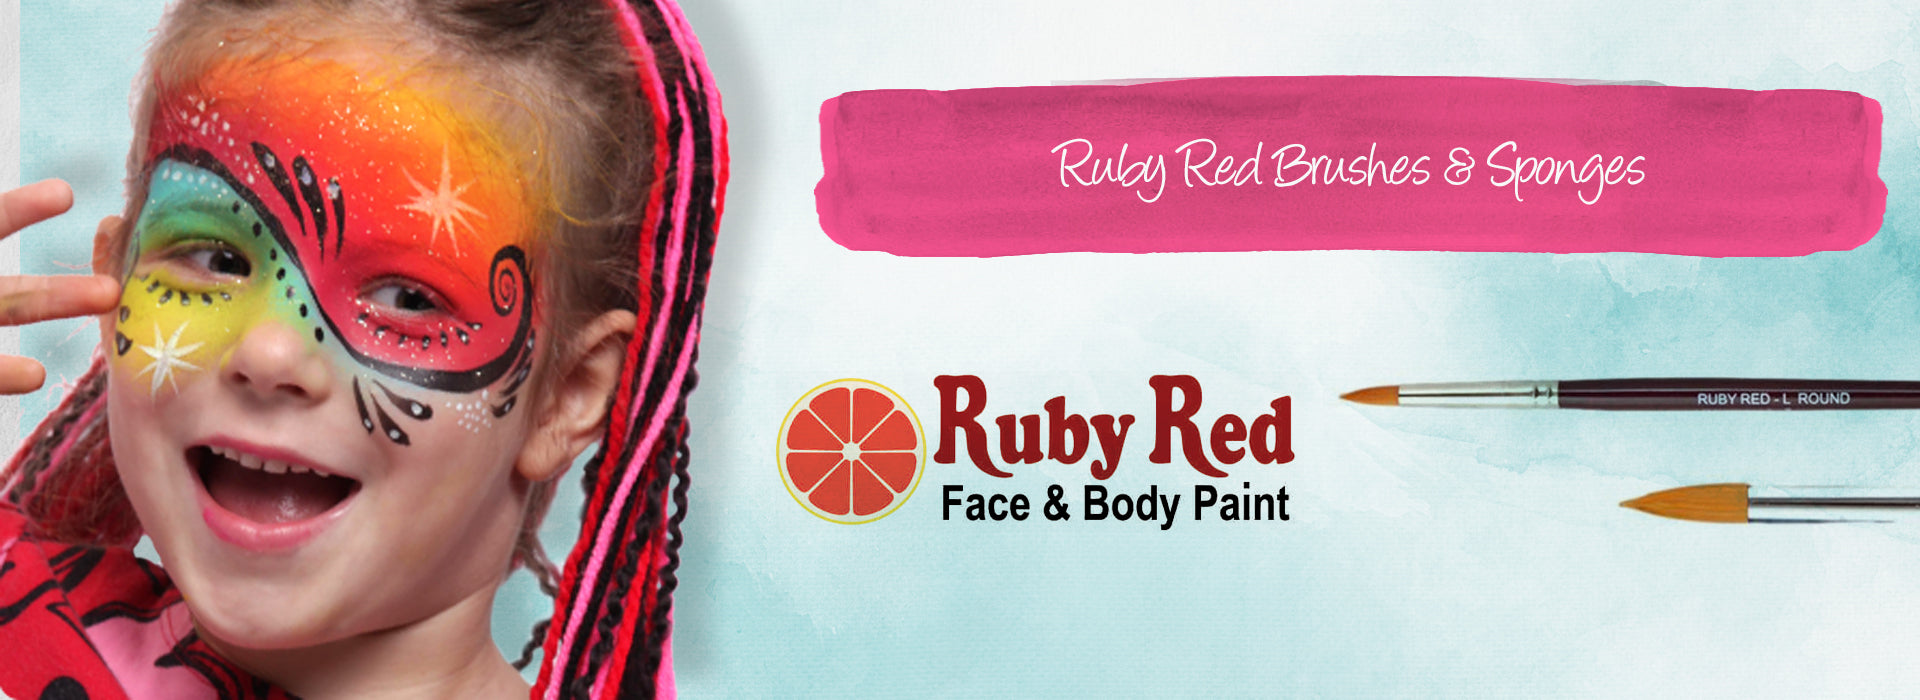 Ruby Red Brushes and Sponges